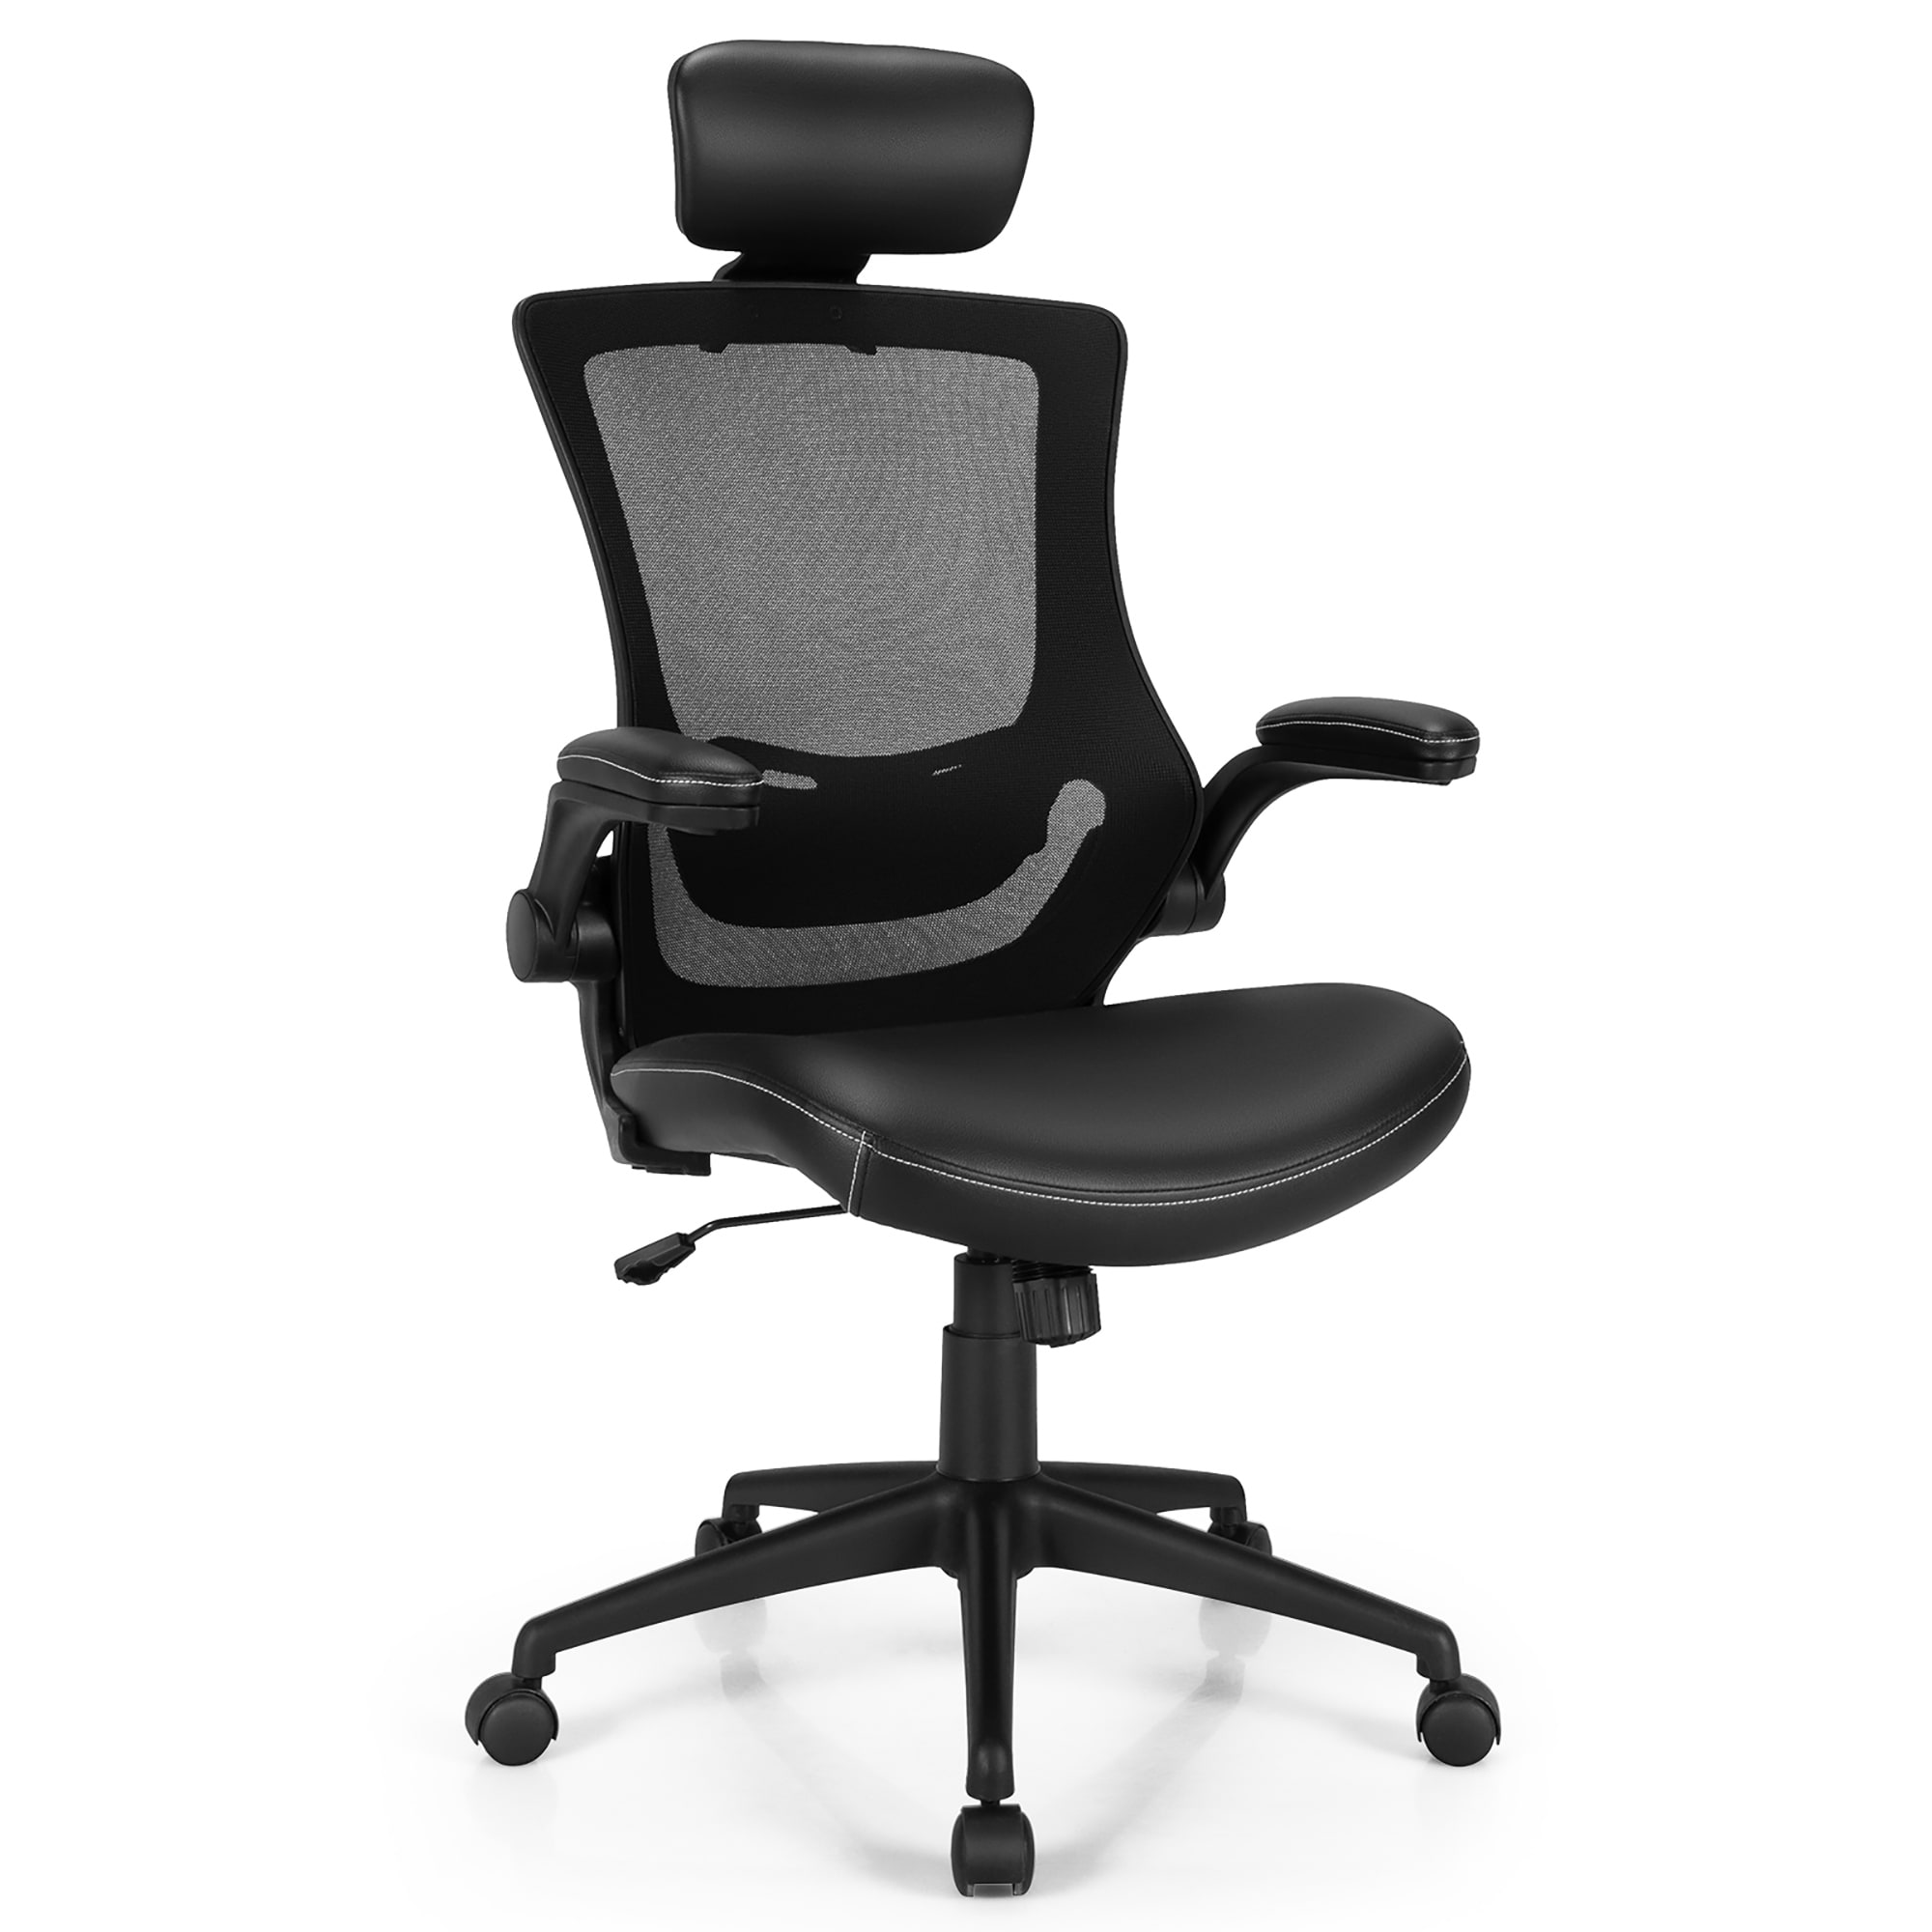 https://ak1.ostkcdn.com/images/products/is/images/direct/62732ba08b5a07860b099b1271d9547bc749d749/Costway-Mesh-Back-Adjustable-Swivel-Office-Chair-w--Flip-up-Arms.jpg